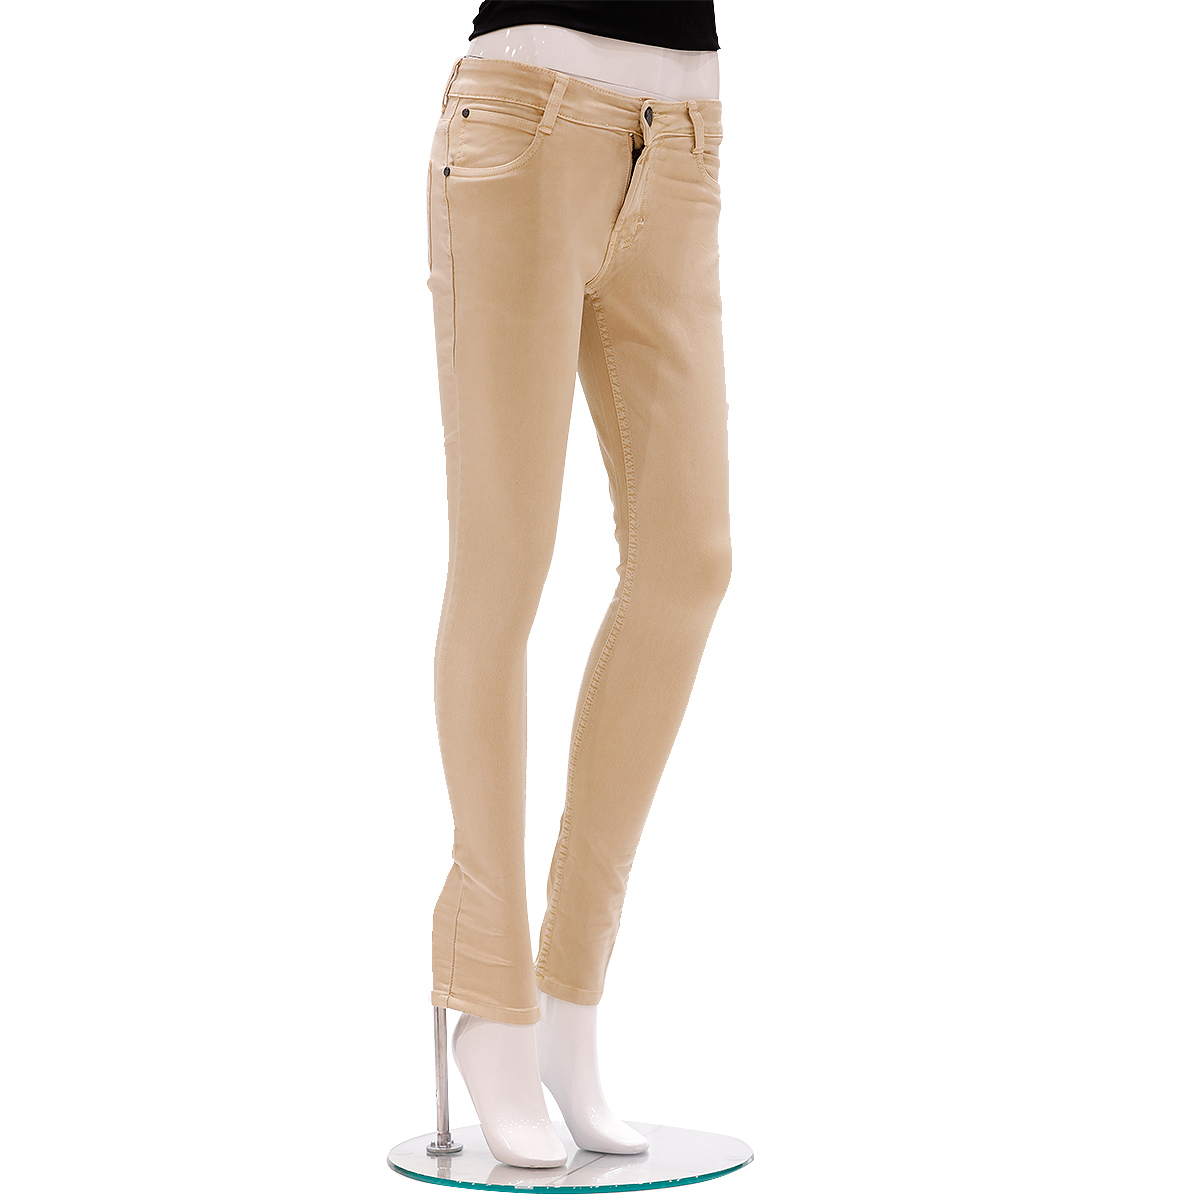 Zola Full Length Mid Waist Silky Soft Finished Jeans With 1 Button Fly Front Zip Opening - Fawn, Size-30